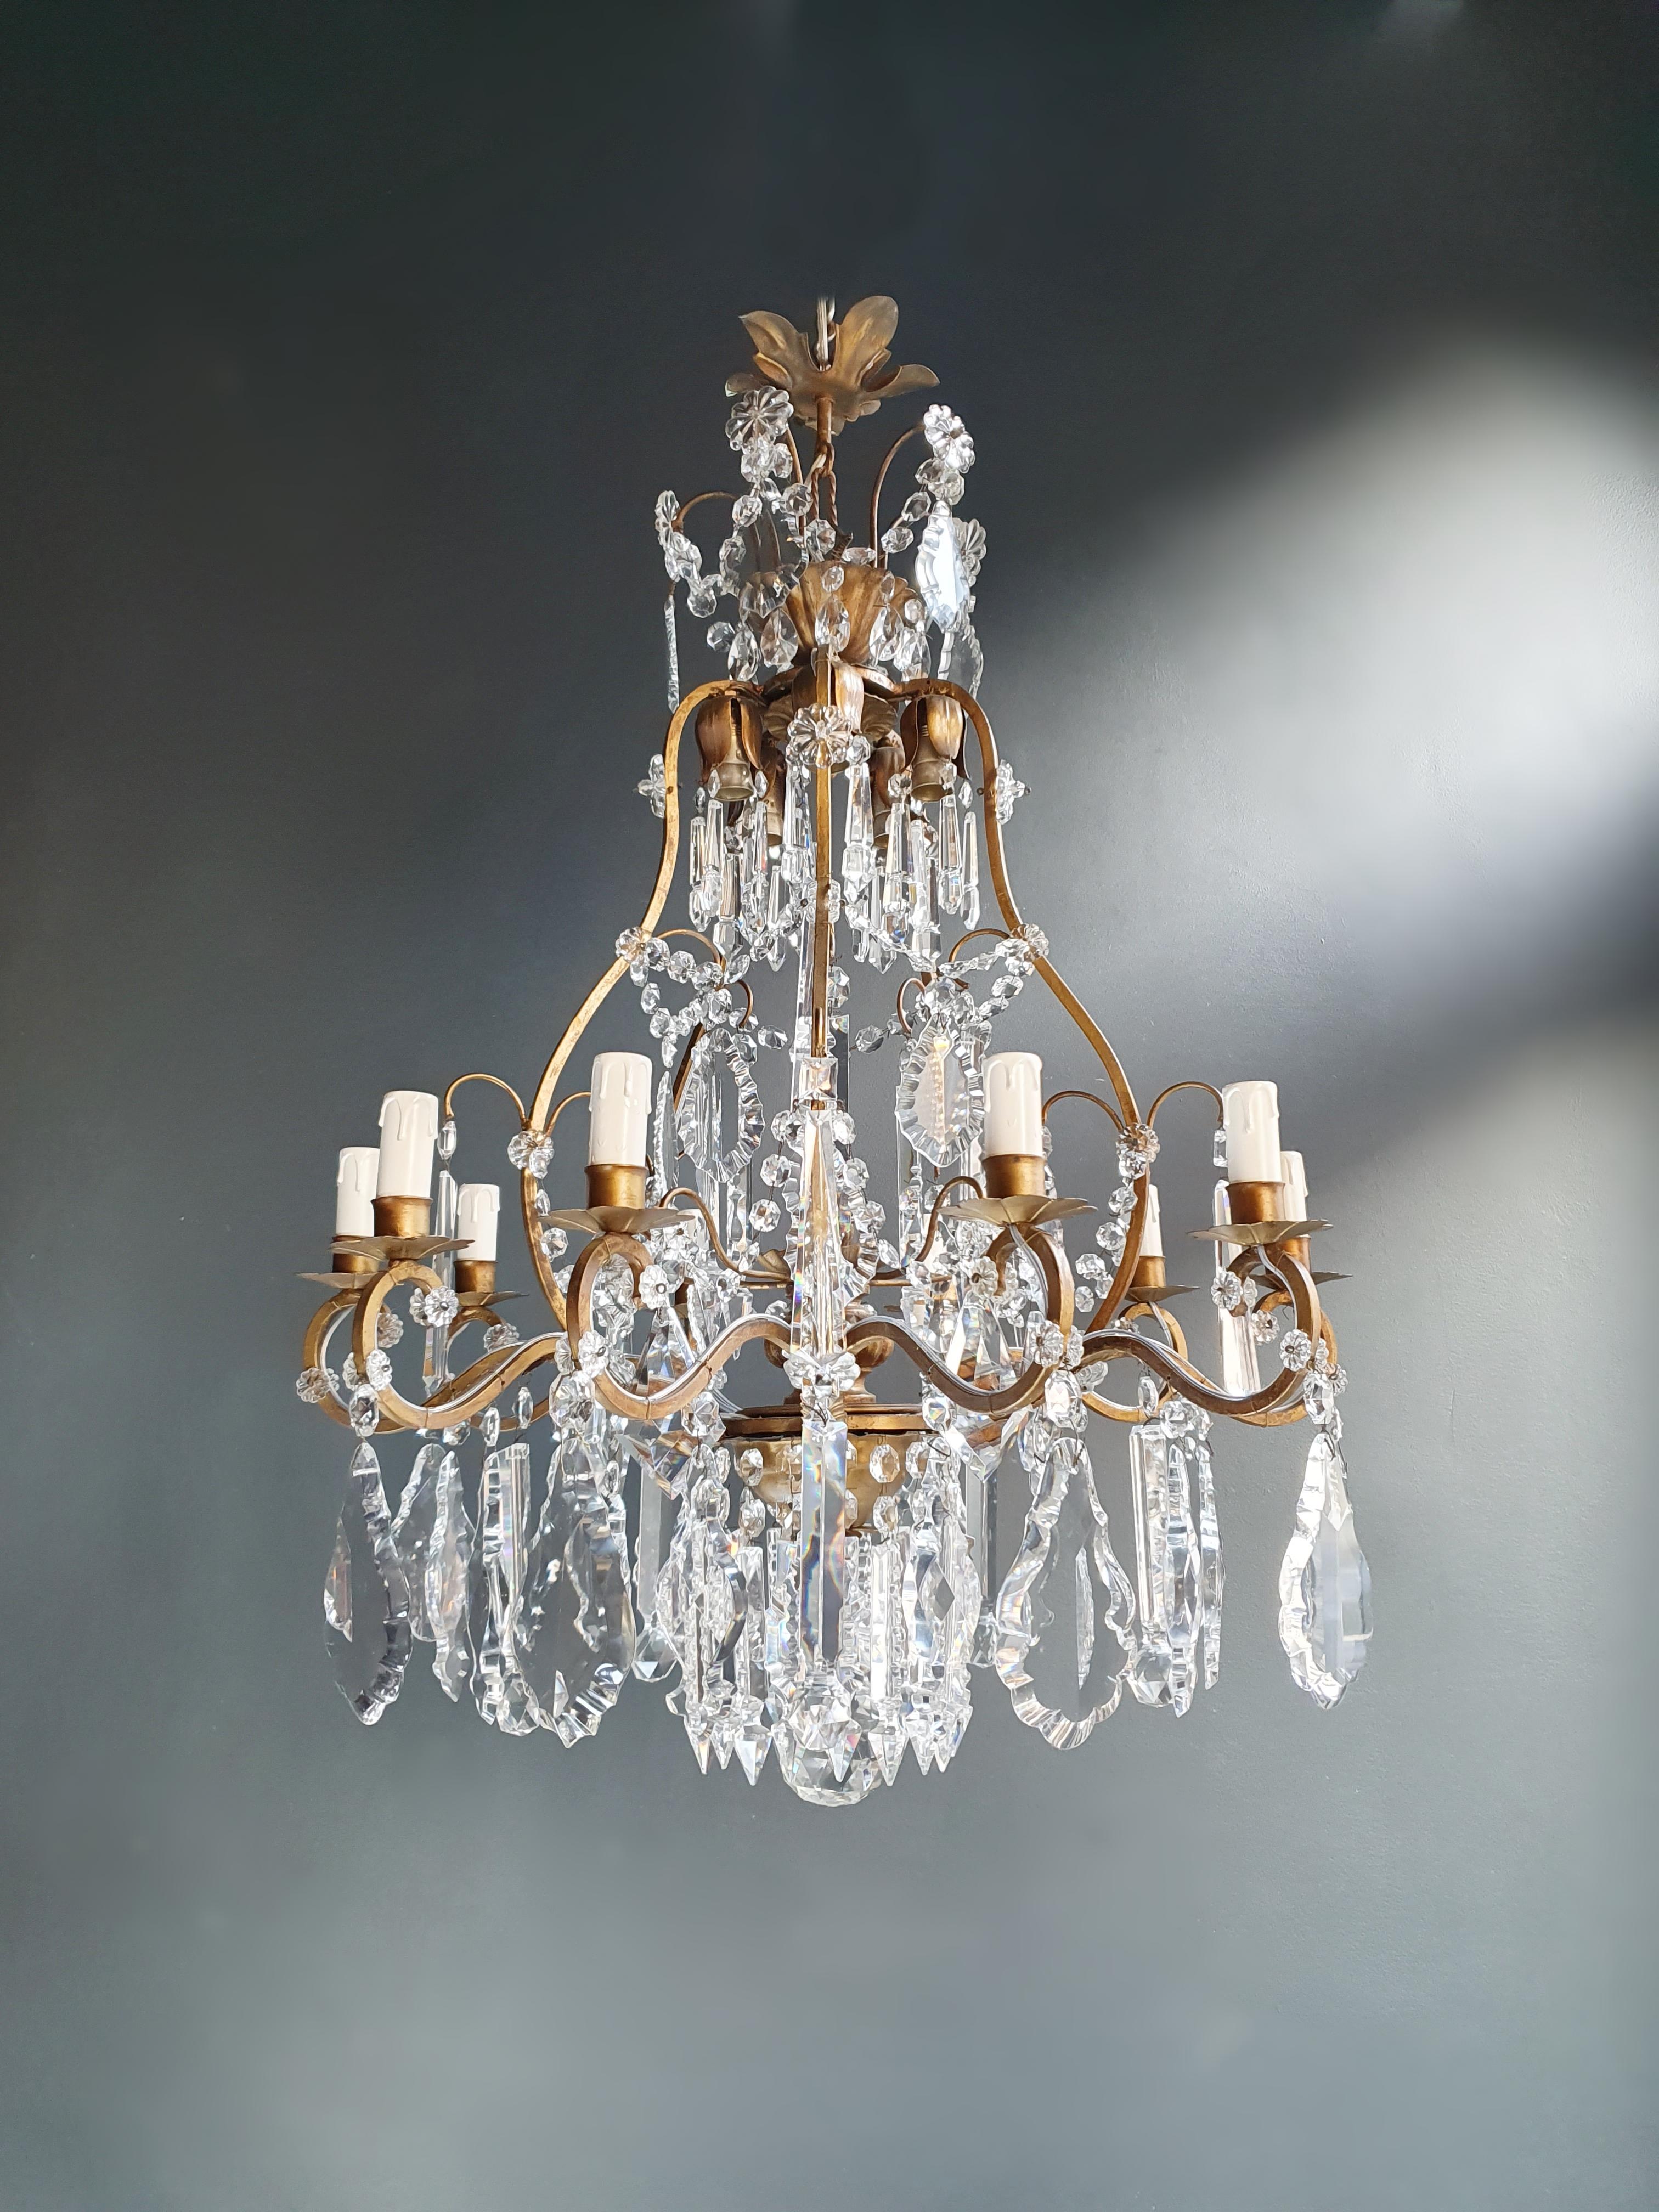 **Cherished Antique Chandelier - Lovingly Restored in Berlin**

Introducing an exquisite antique chandelier that has been lovingly restored in Berlin. Its electrical wiring is compatible with US systems, ensuring seamless use. This chandelier has